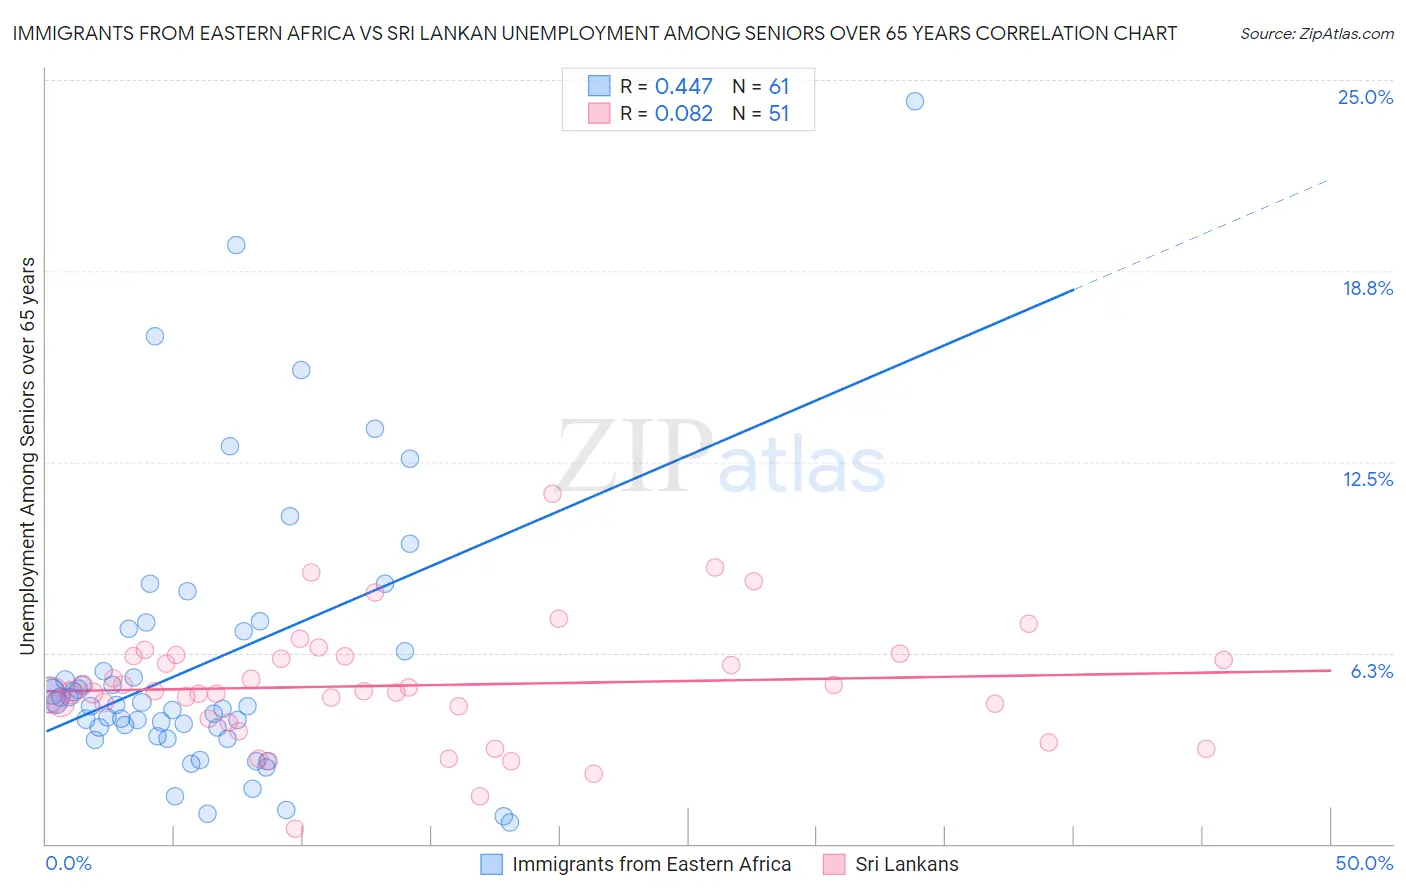 Immigrants from Eastern Africa vs Sri Lankan Unemployment Among Seniors over 65 years